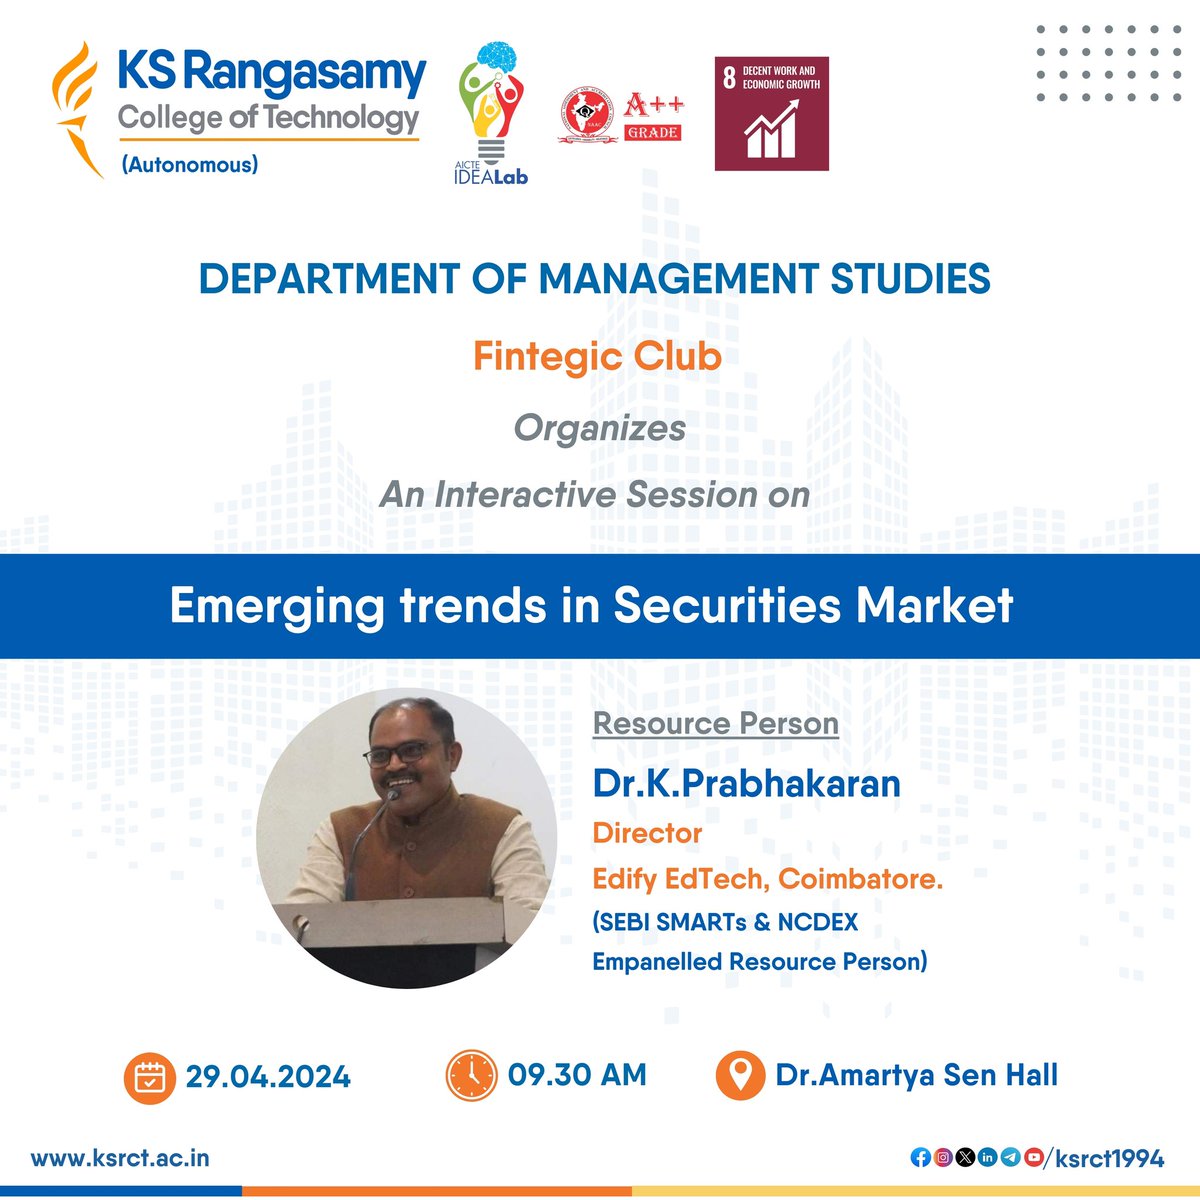 Fintegic club of Department of Management Studies #ksrct1994 organizes guest lecture on 'Emerging trends in Securities Market' on 29.04.2024 by 9.30 am @ Dr. Amartya Sen Hall. 

Resource person:
Dr.K.Prabhakaran
Director, 
Edify Edtech, Coimbatore